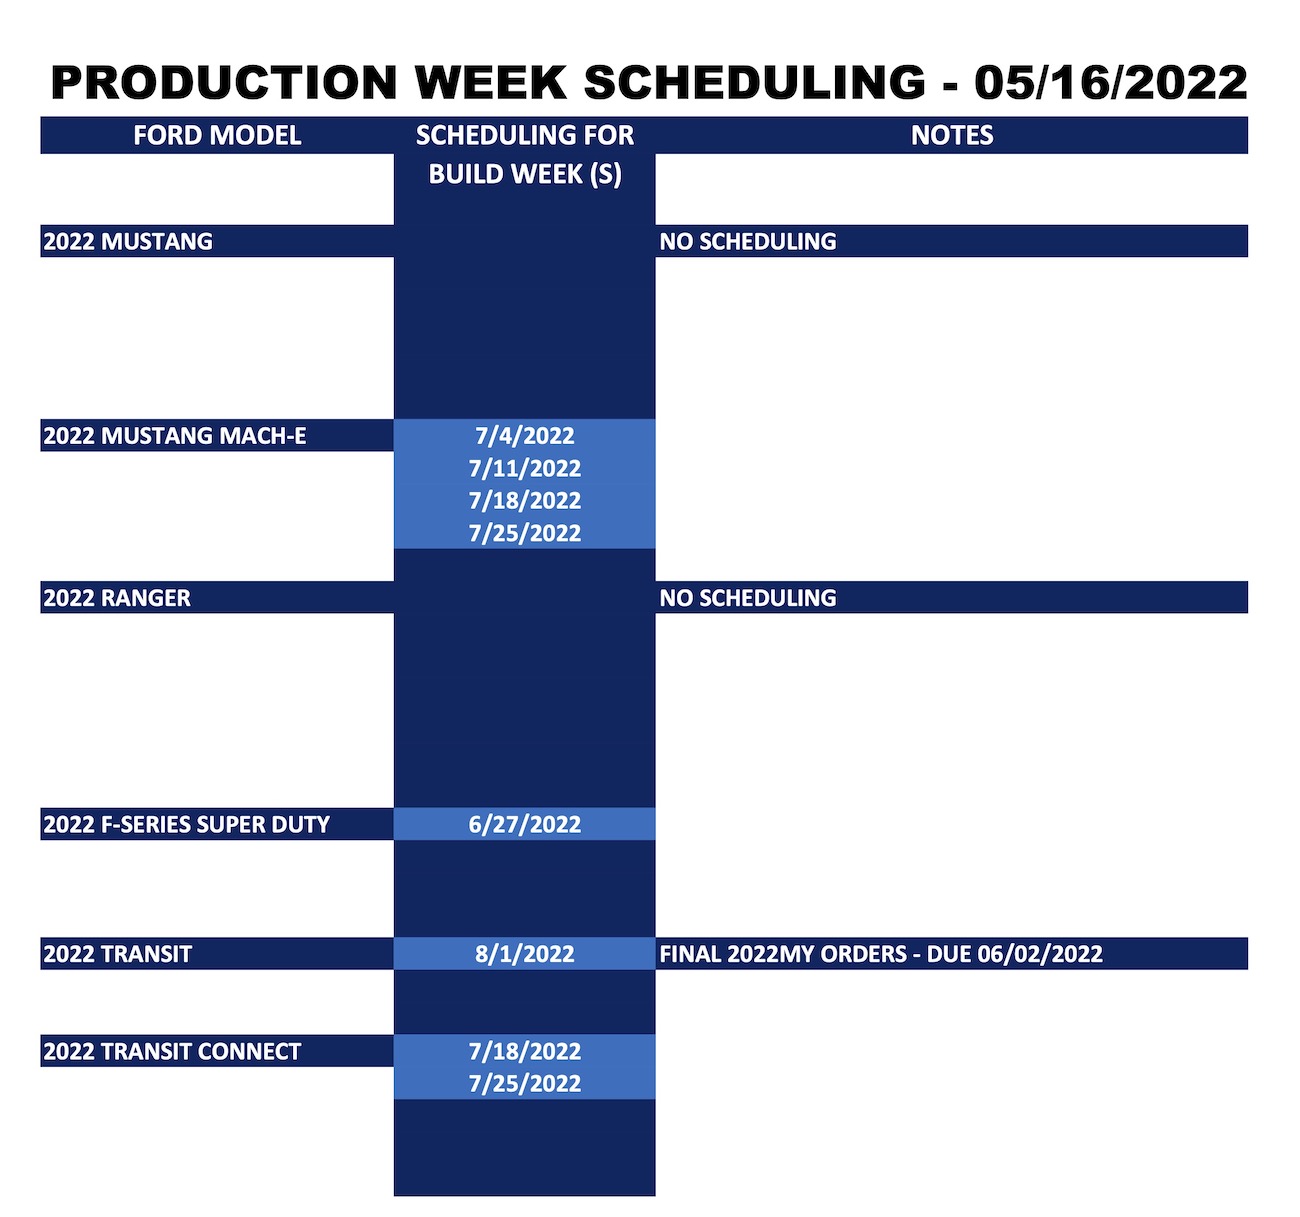 Ford_Production Week Scheduling_2022-05-16_2.jpg